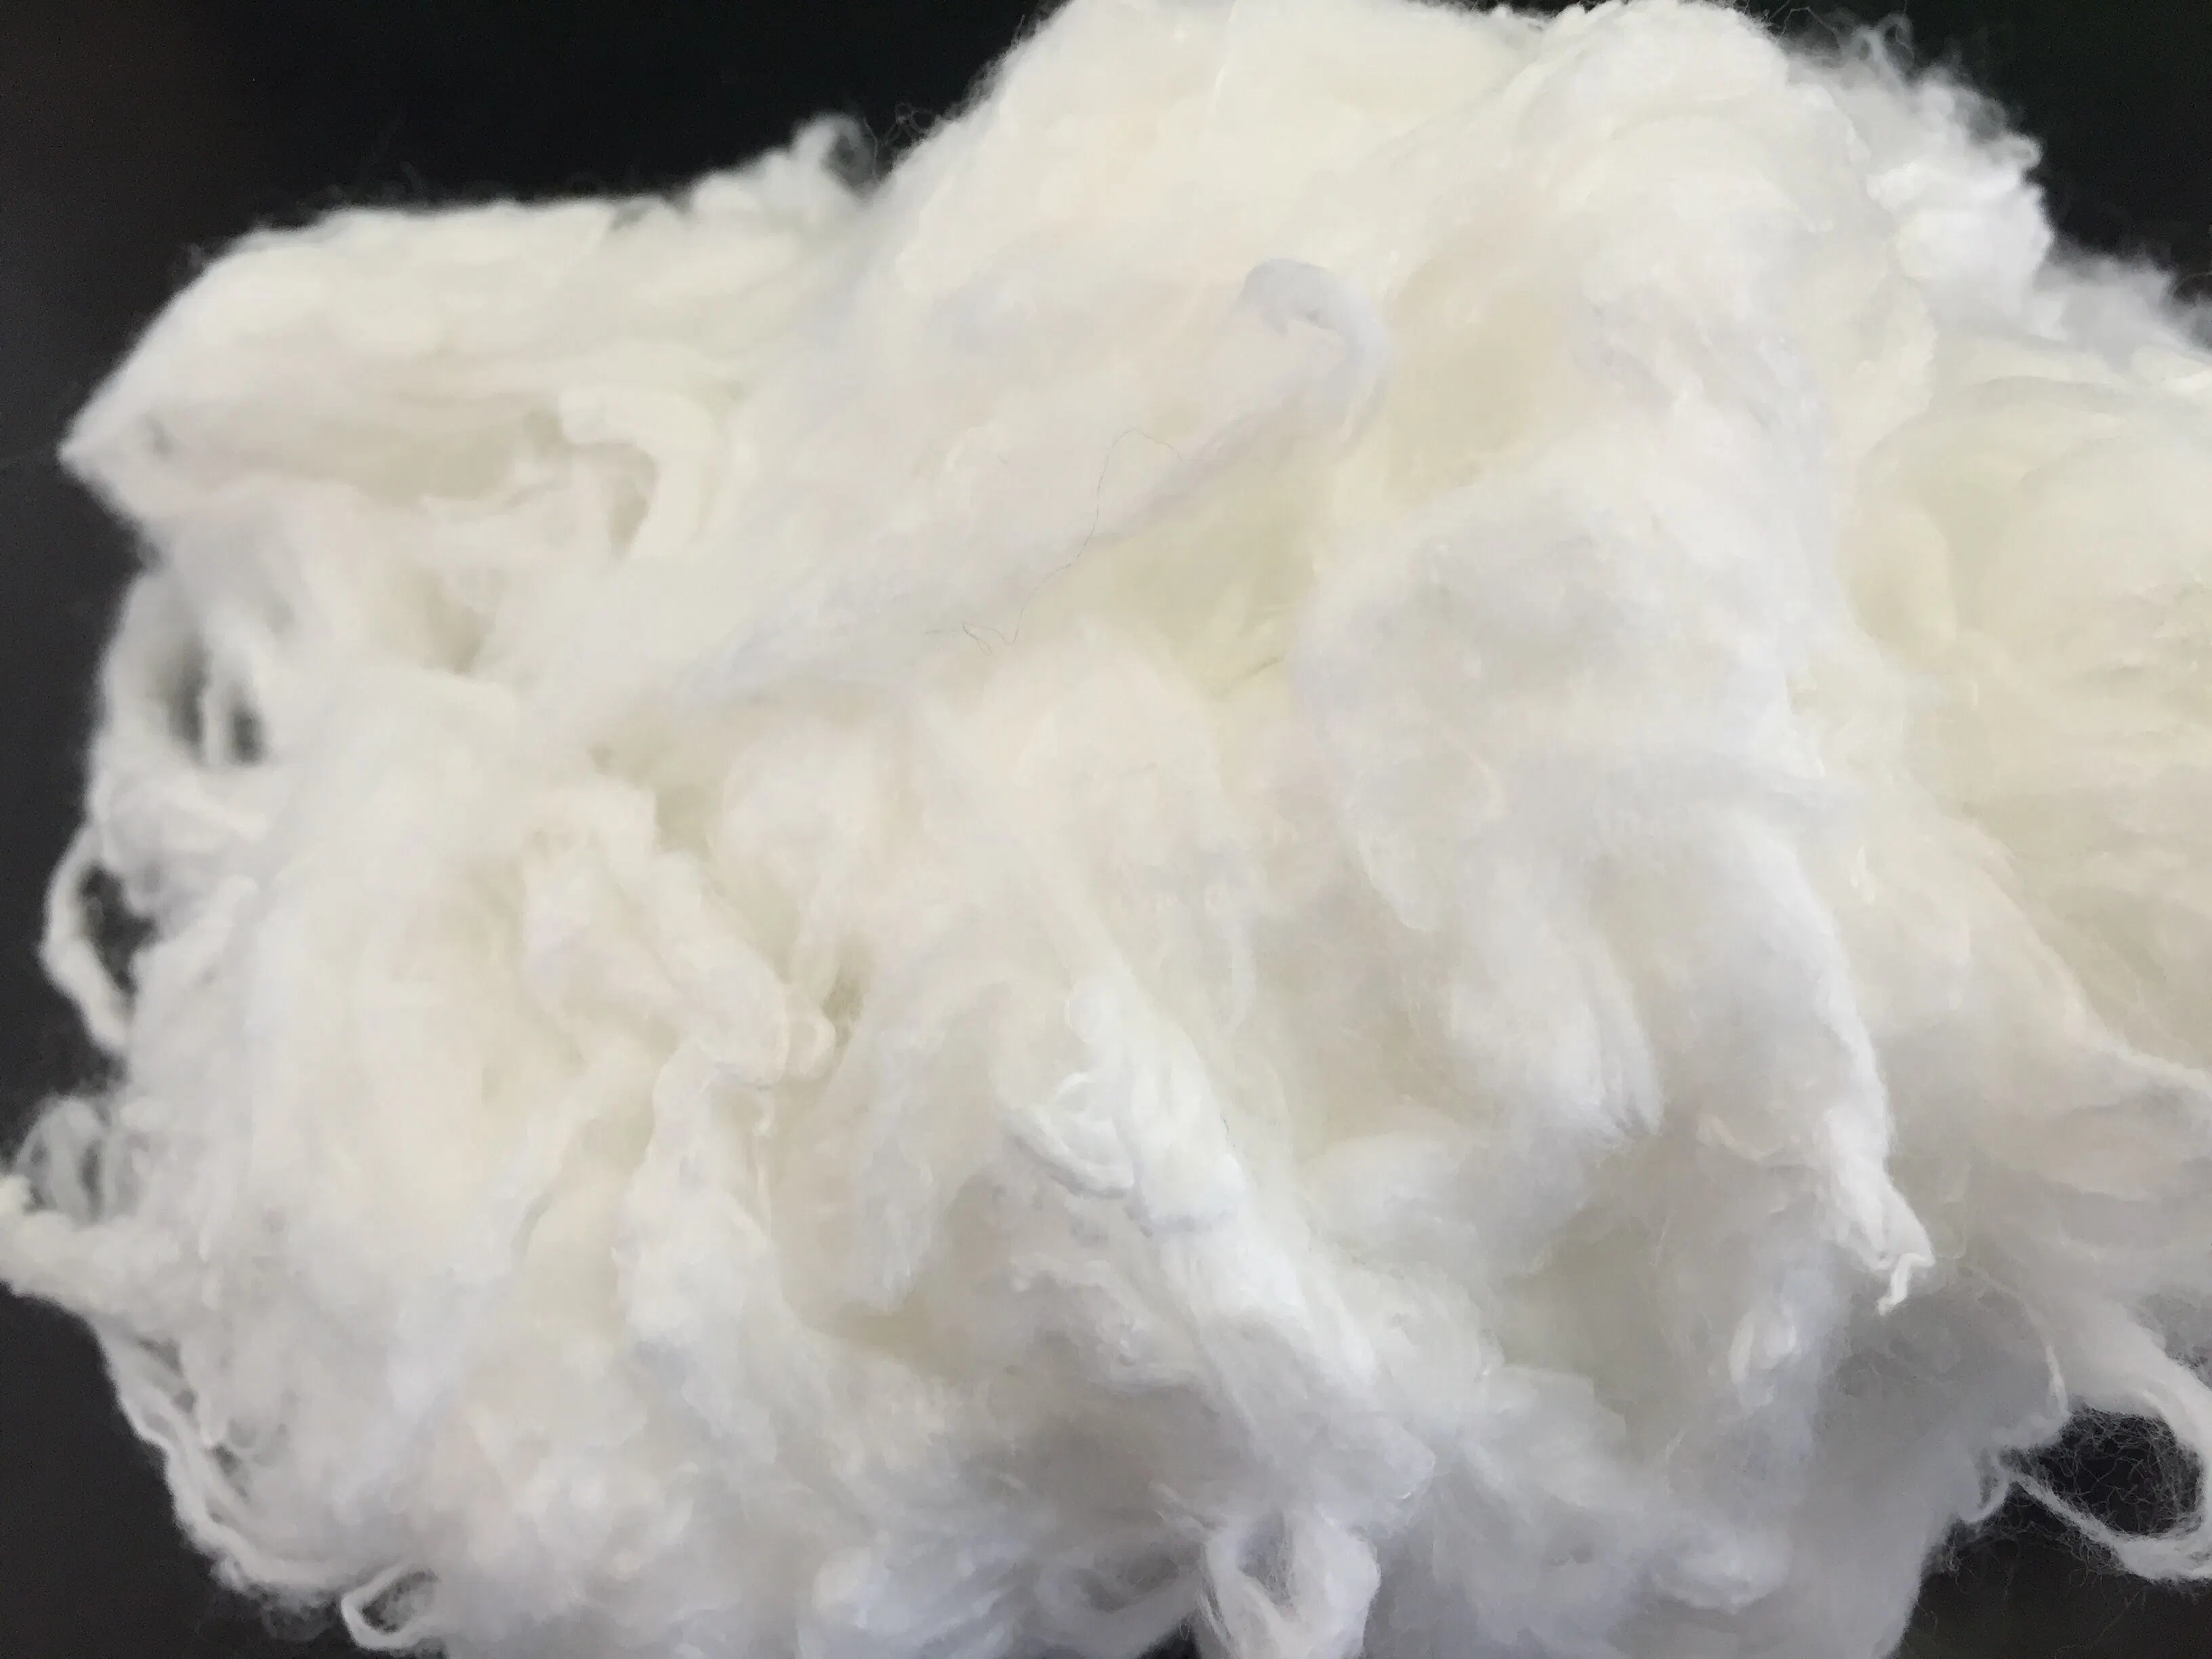 1.5D X 38mm RW Viscose Staple Fiber or Textile Purpose, for Making PV Yarn. for Spinning, Weaving